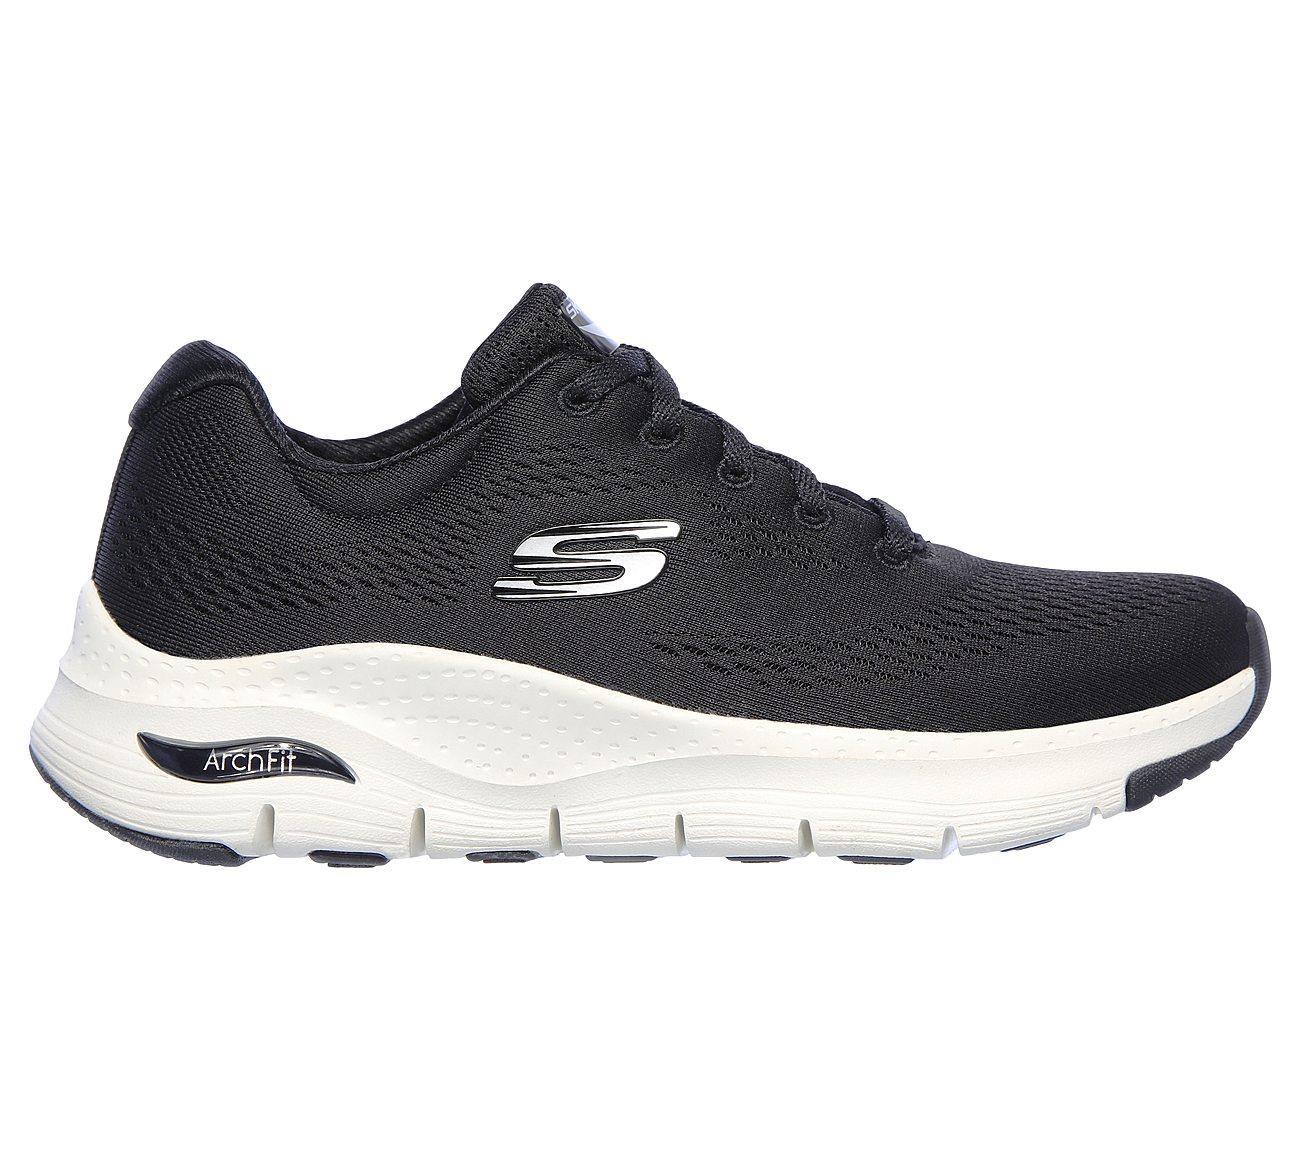 Skechers S Wide Fit 149057 Arch Fit Trainers in Black/White (Black) - Lyst